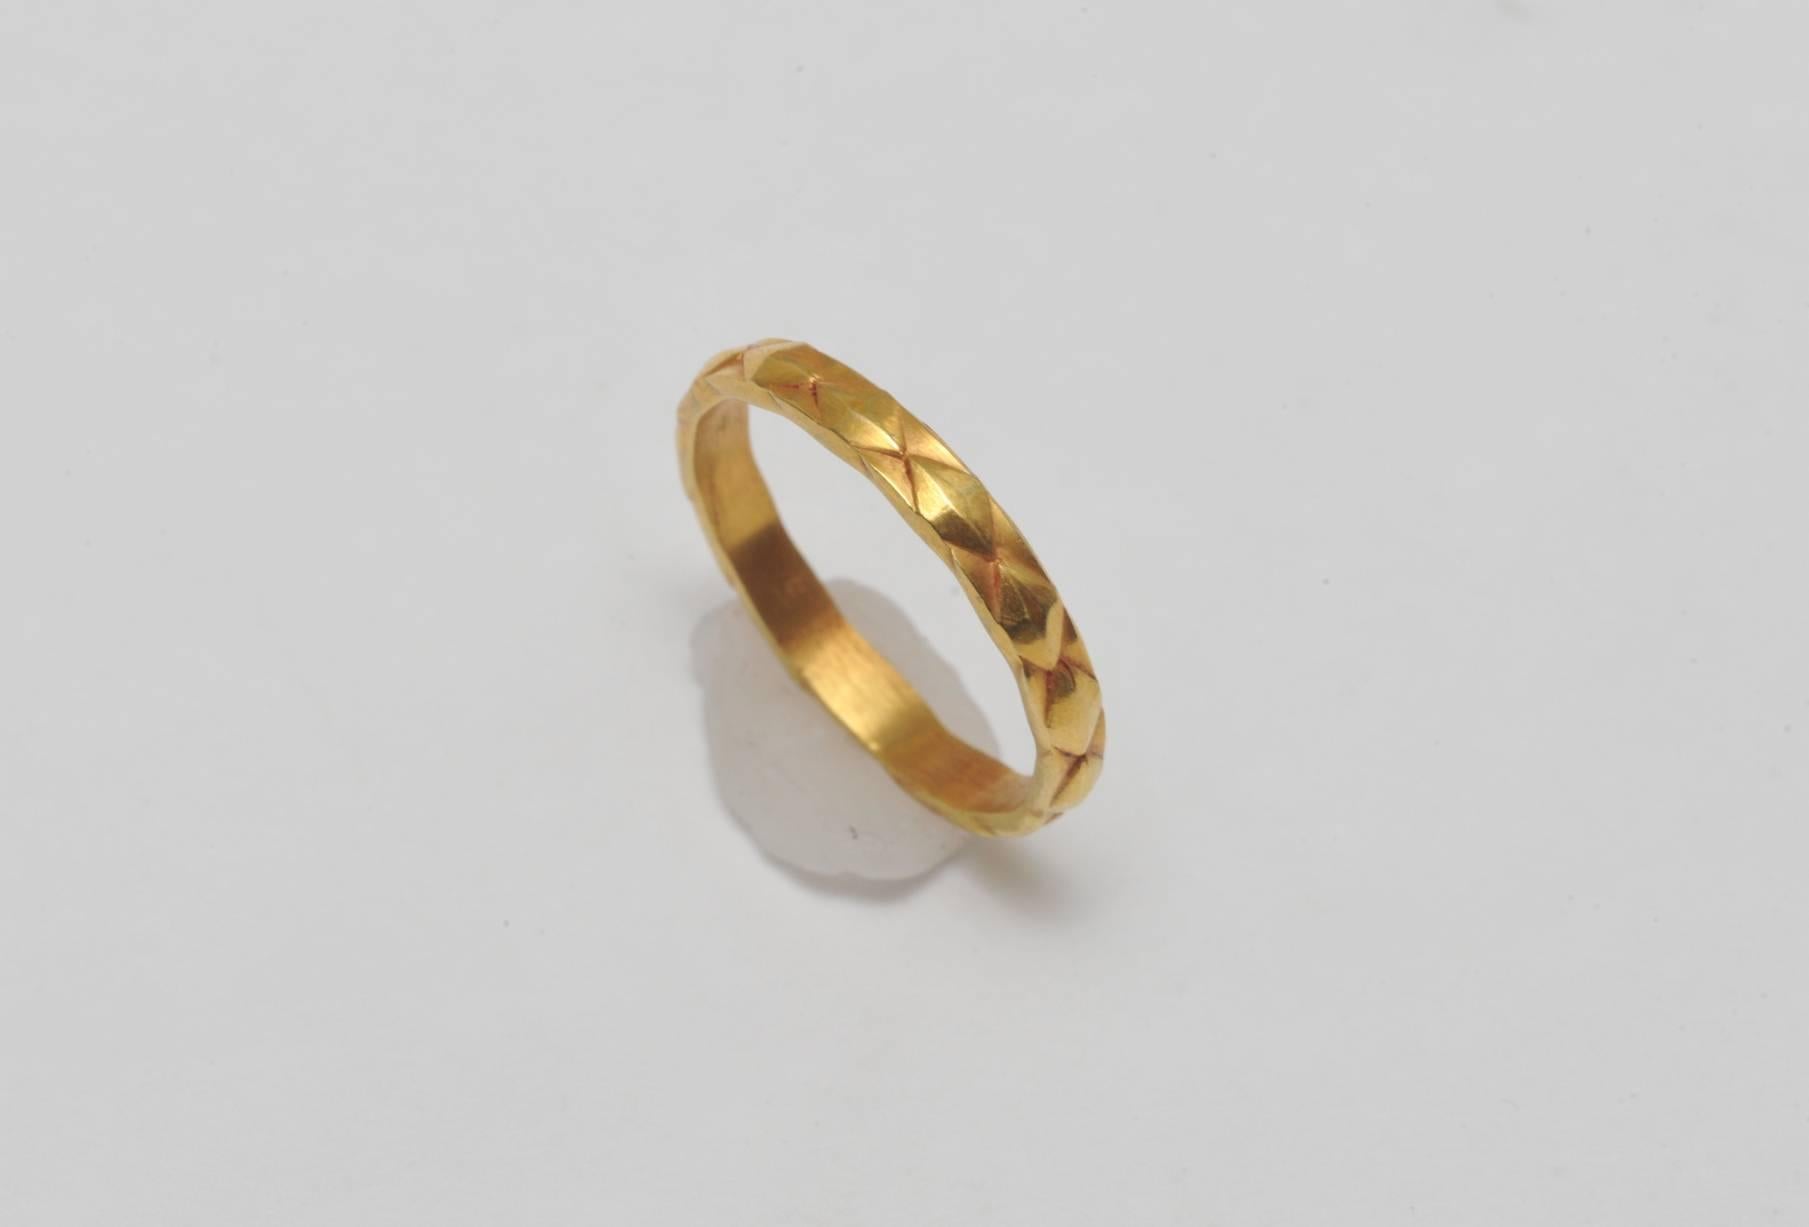 Unusual 18K gold band with textured diamond-shape detail all around.  Ring size is between 5 3/4 and 6.  